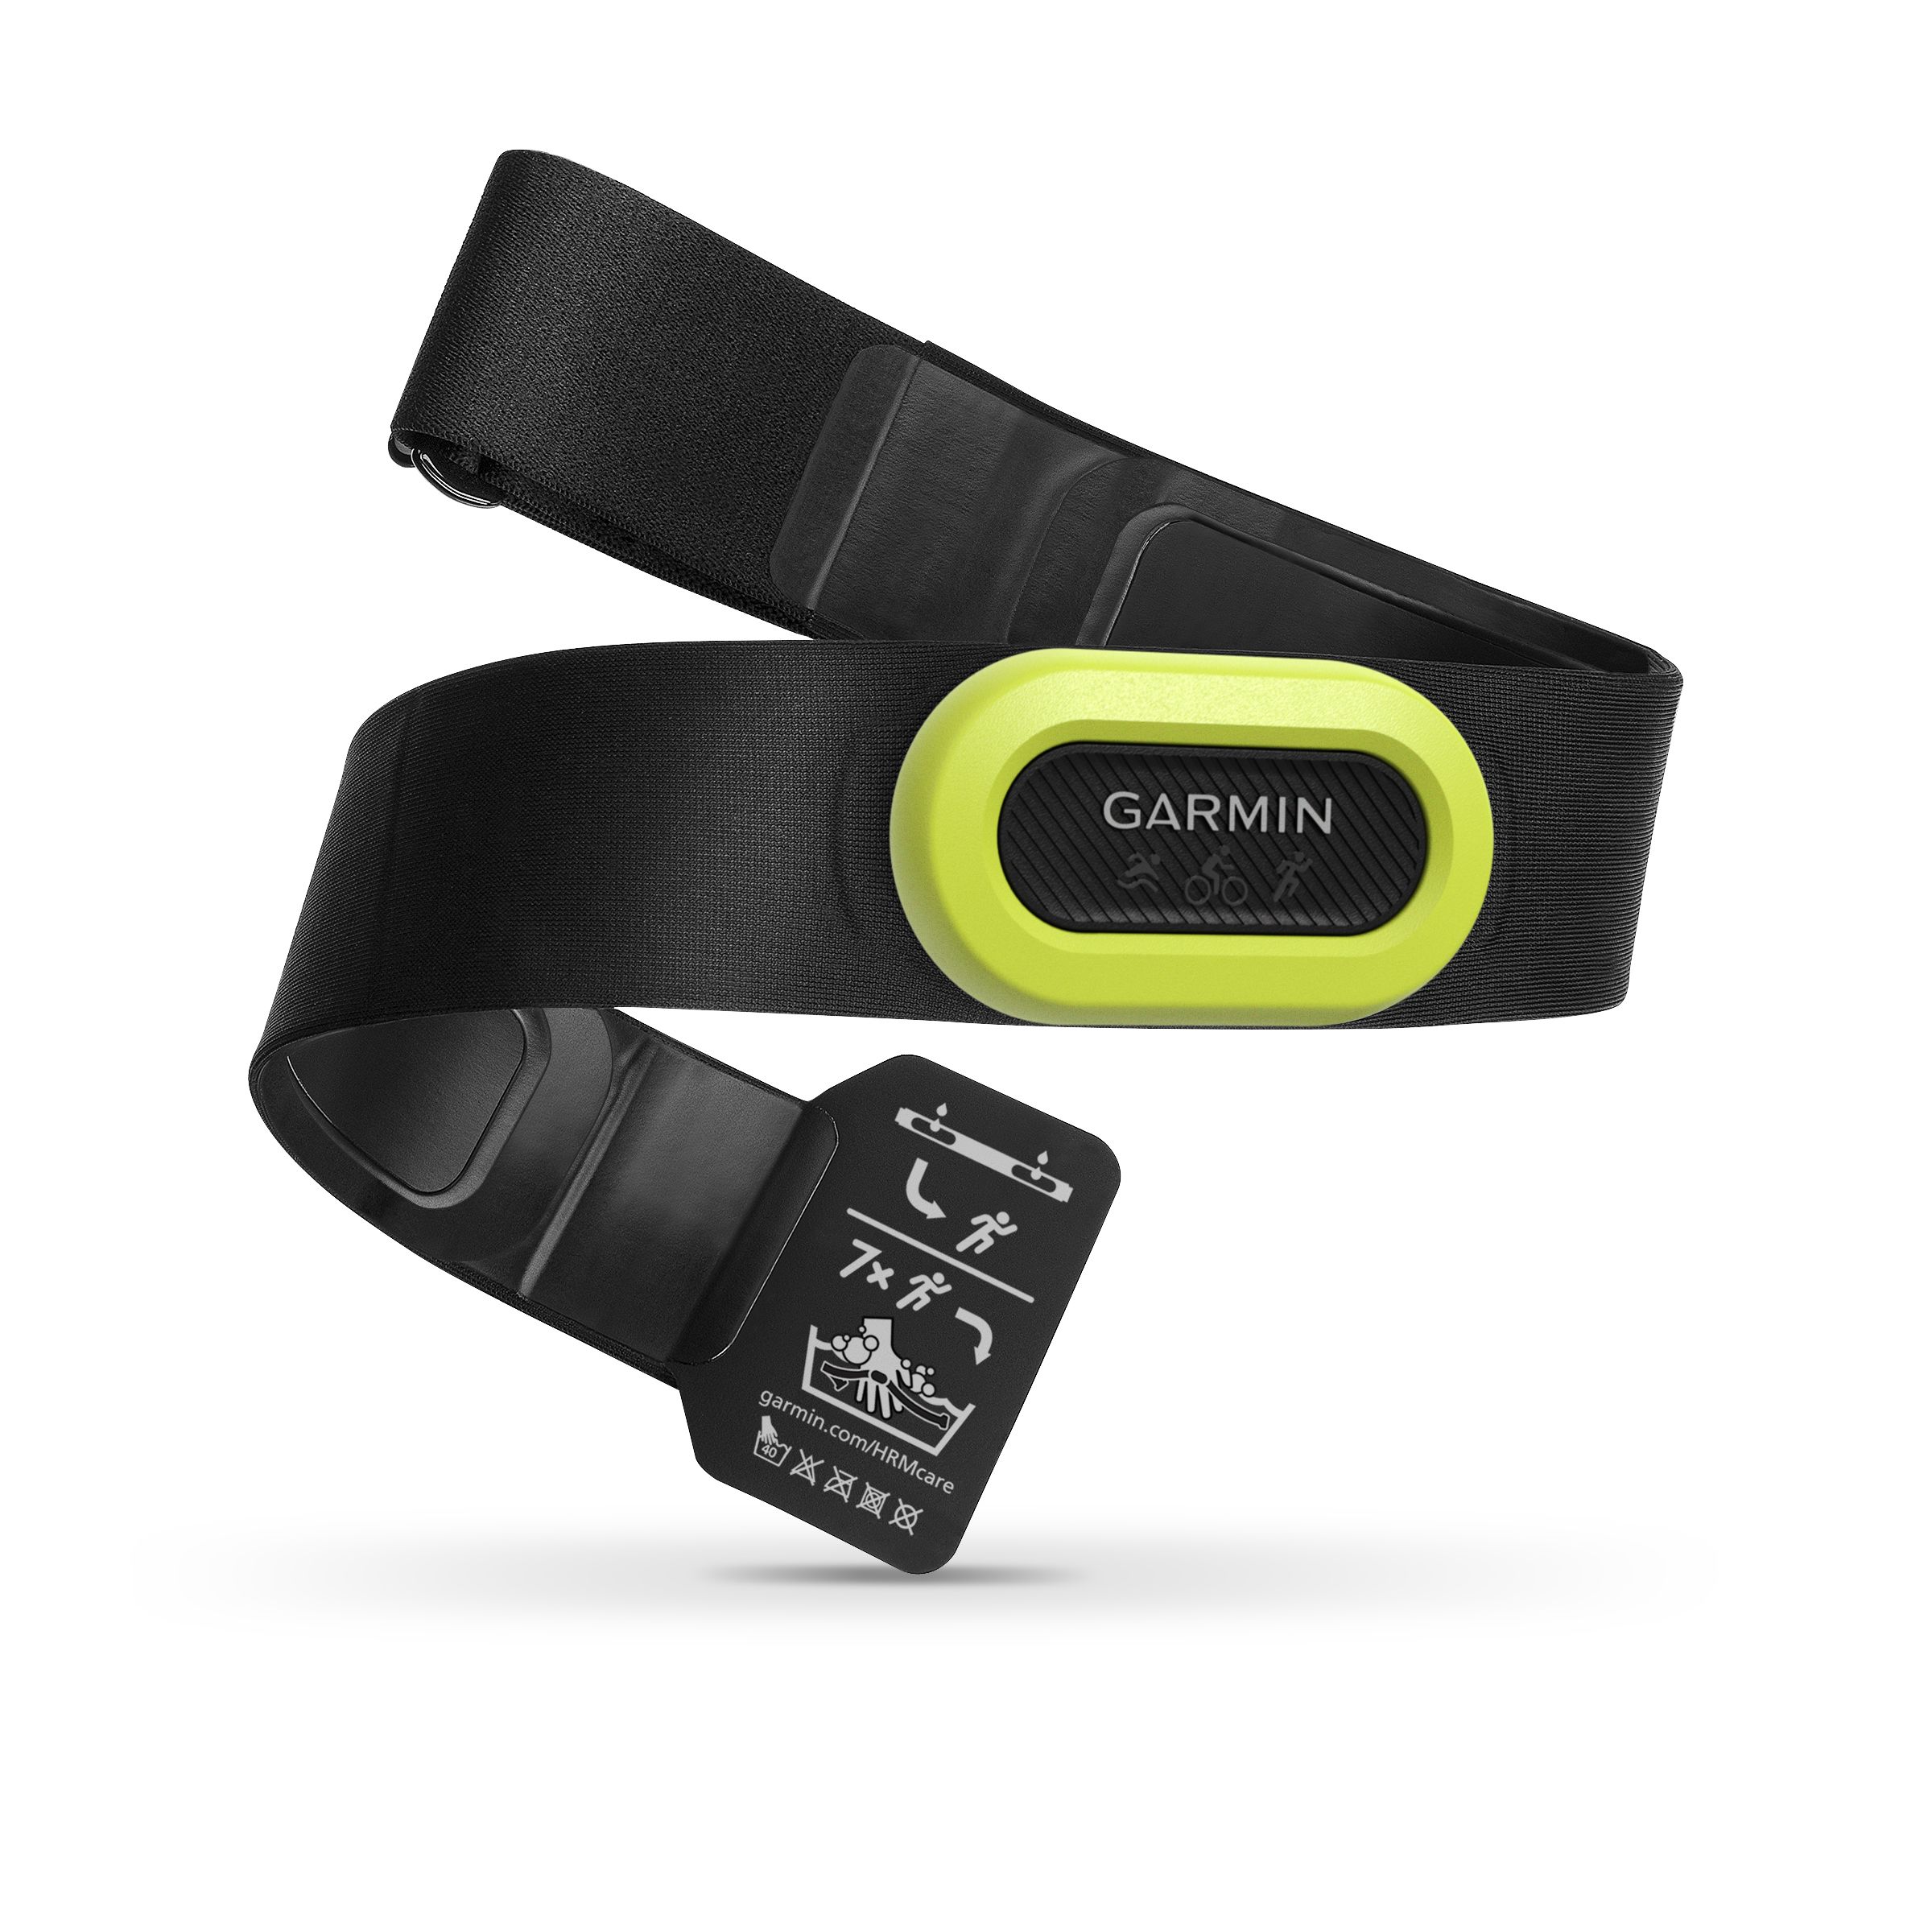 Garmin launches Forerunner 745, designed with athletes in mind